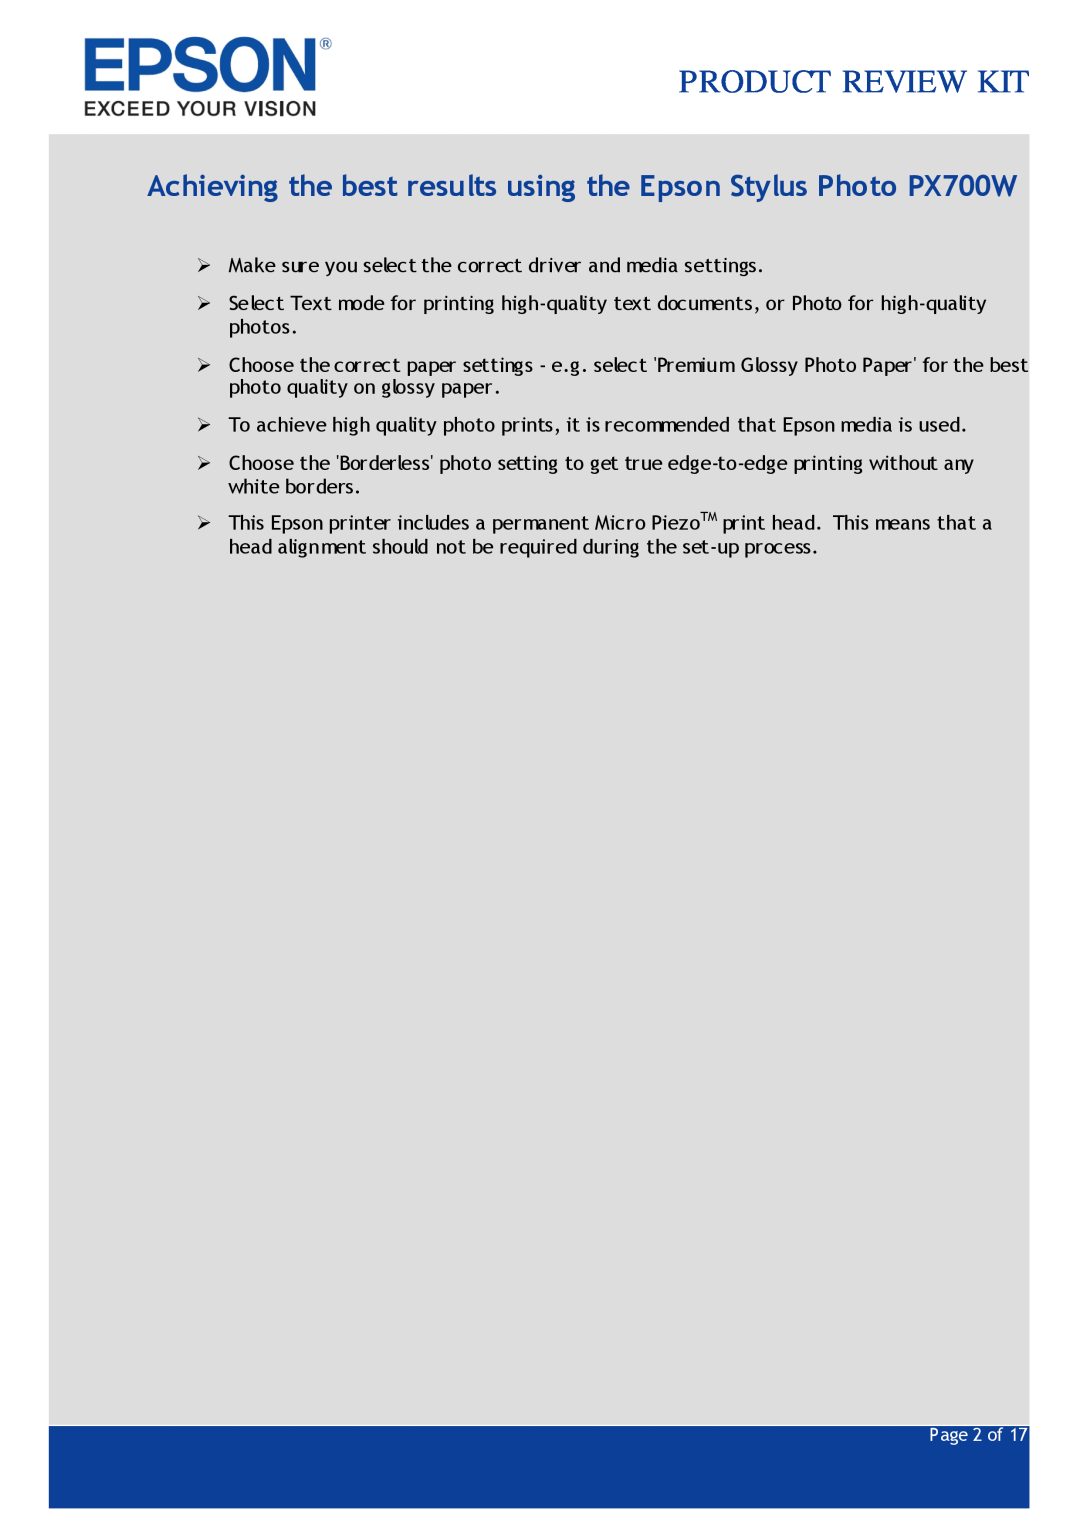 Epson PX700W specifications Product Review Kit, Page 2 of 